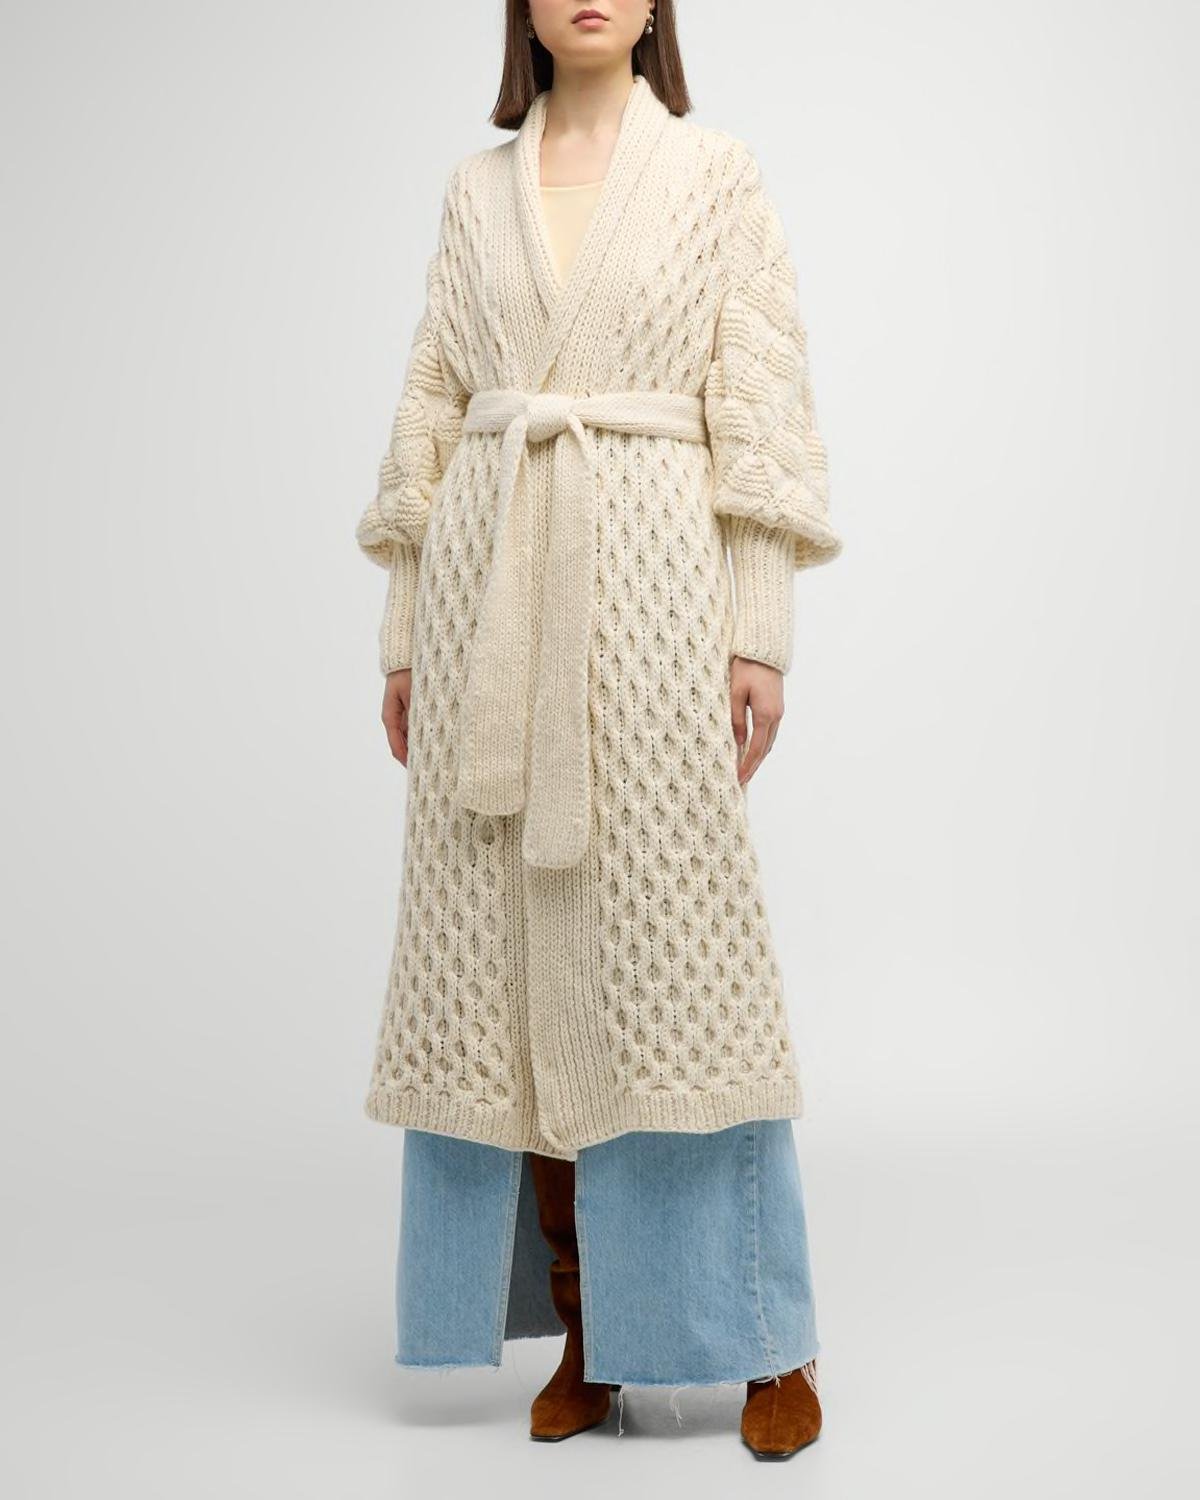 Julie Handmade Chunky-Knit Cashmere Coat by LETANNE